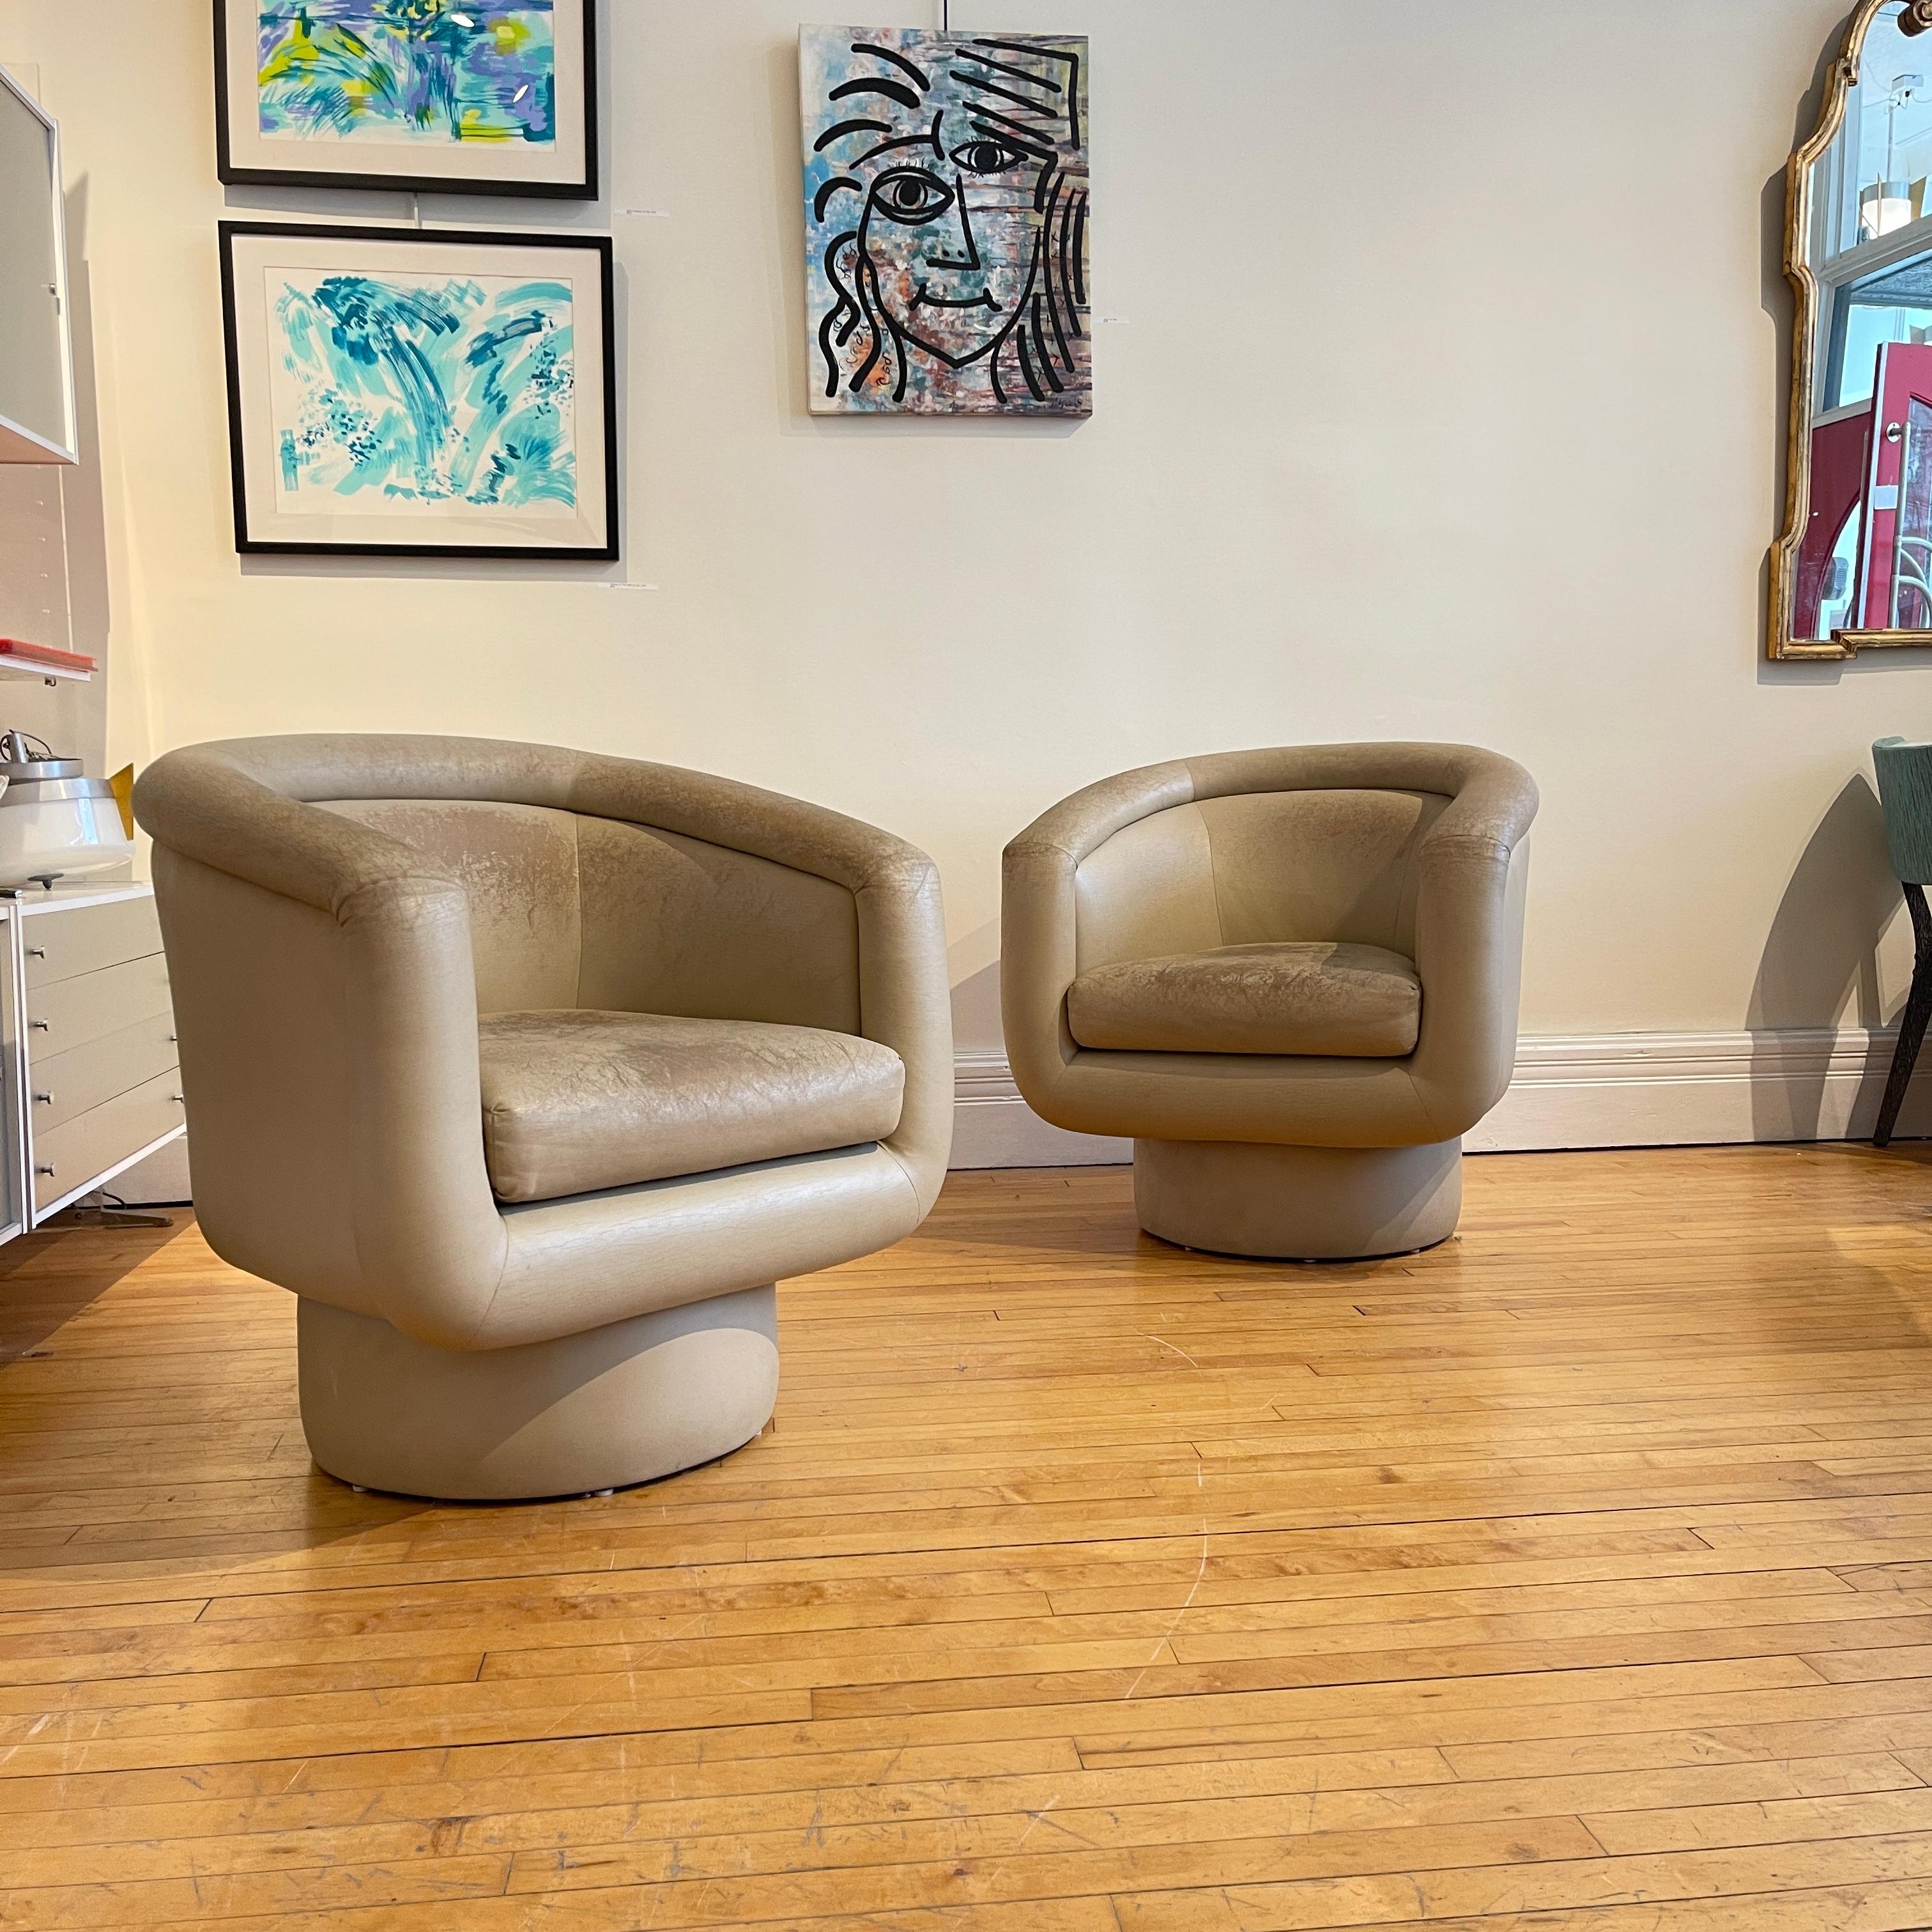 American Lovely Pair of Post-Modern Sculptural Patinated Swivel Chairs